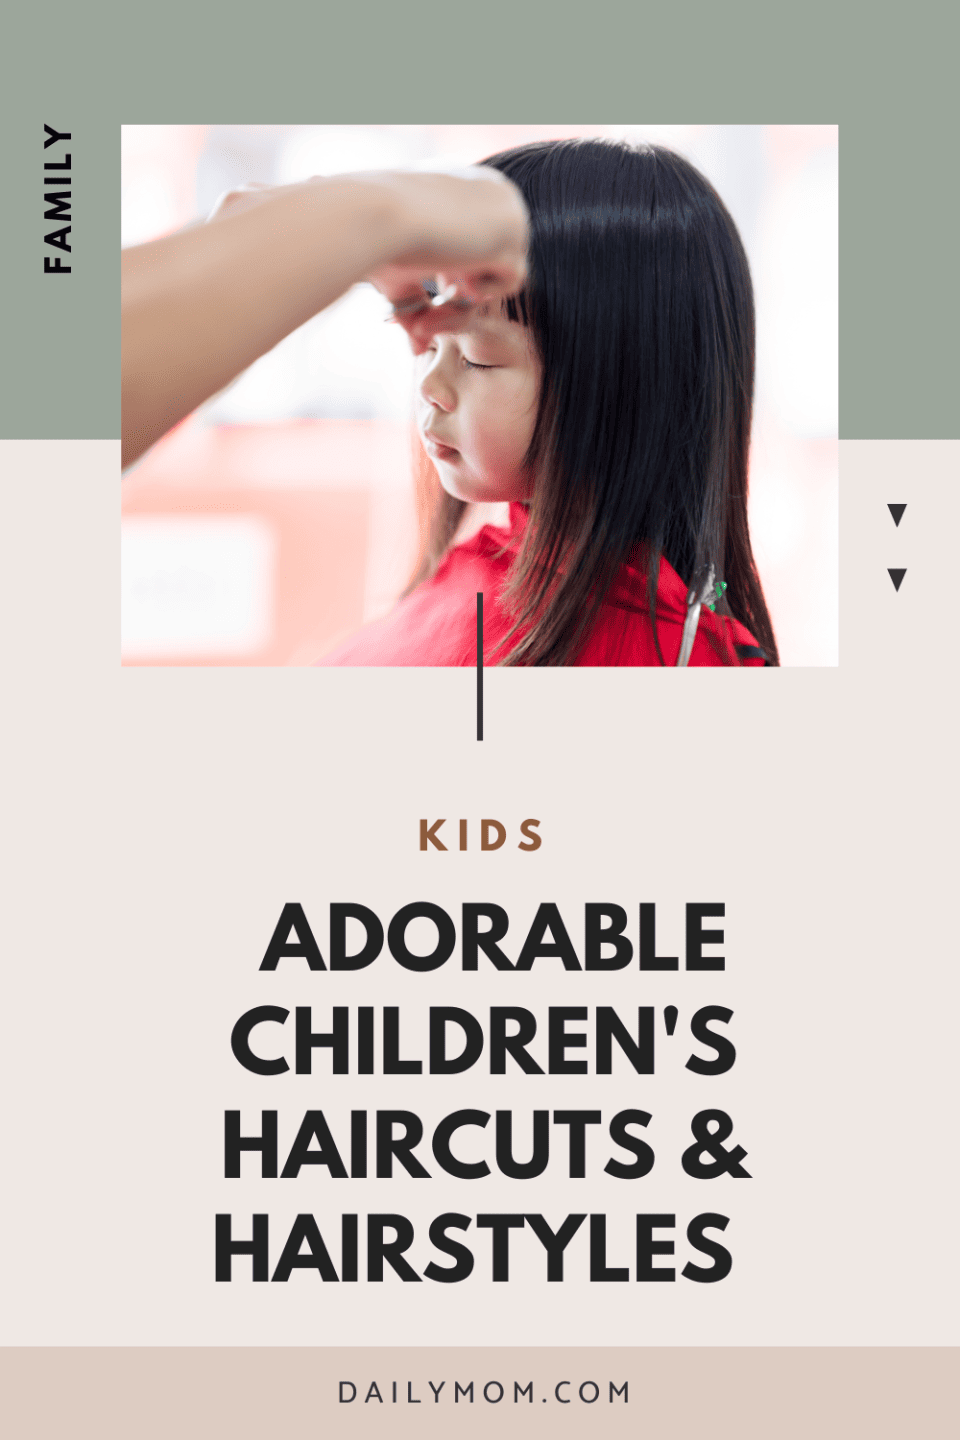 10 Adorable Children'S Haircuts That Will Make Them The Star Of The Class 1 Daily Mom, Magazine For Families